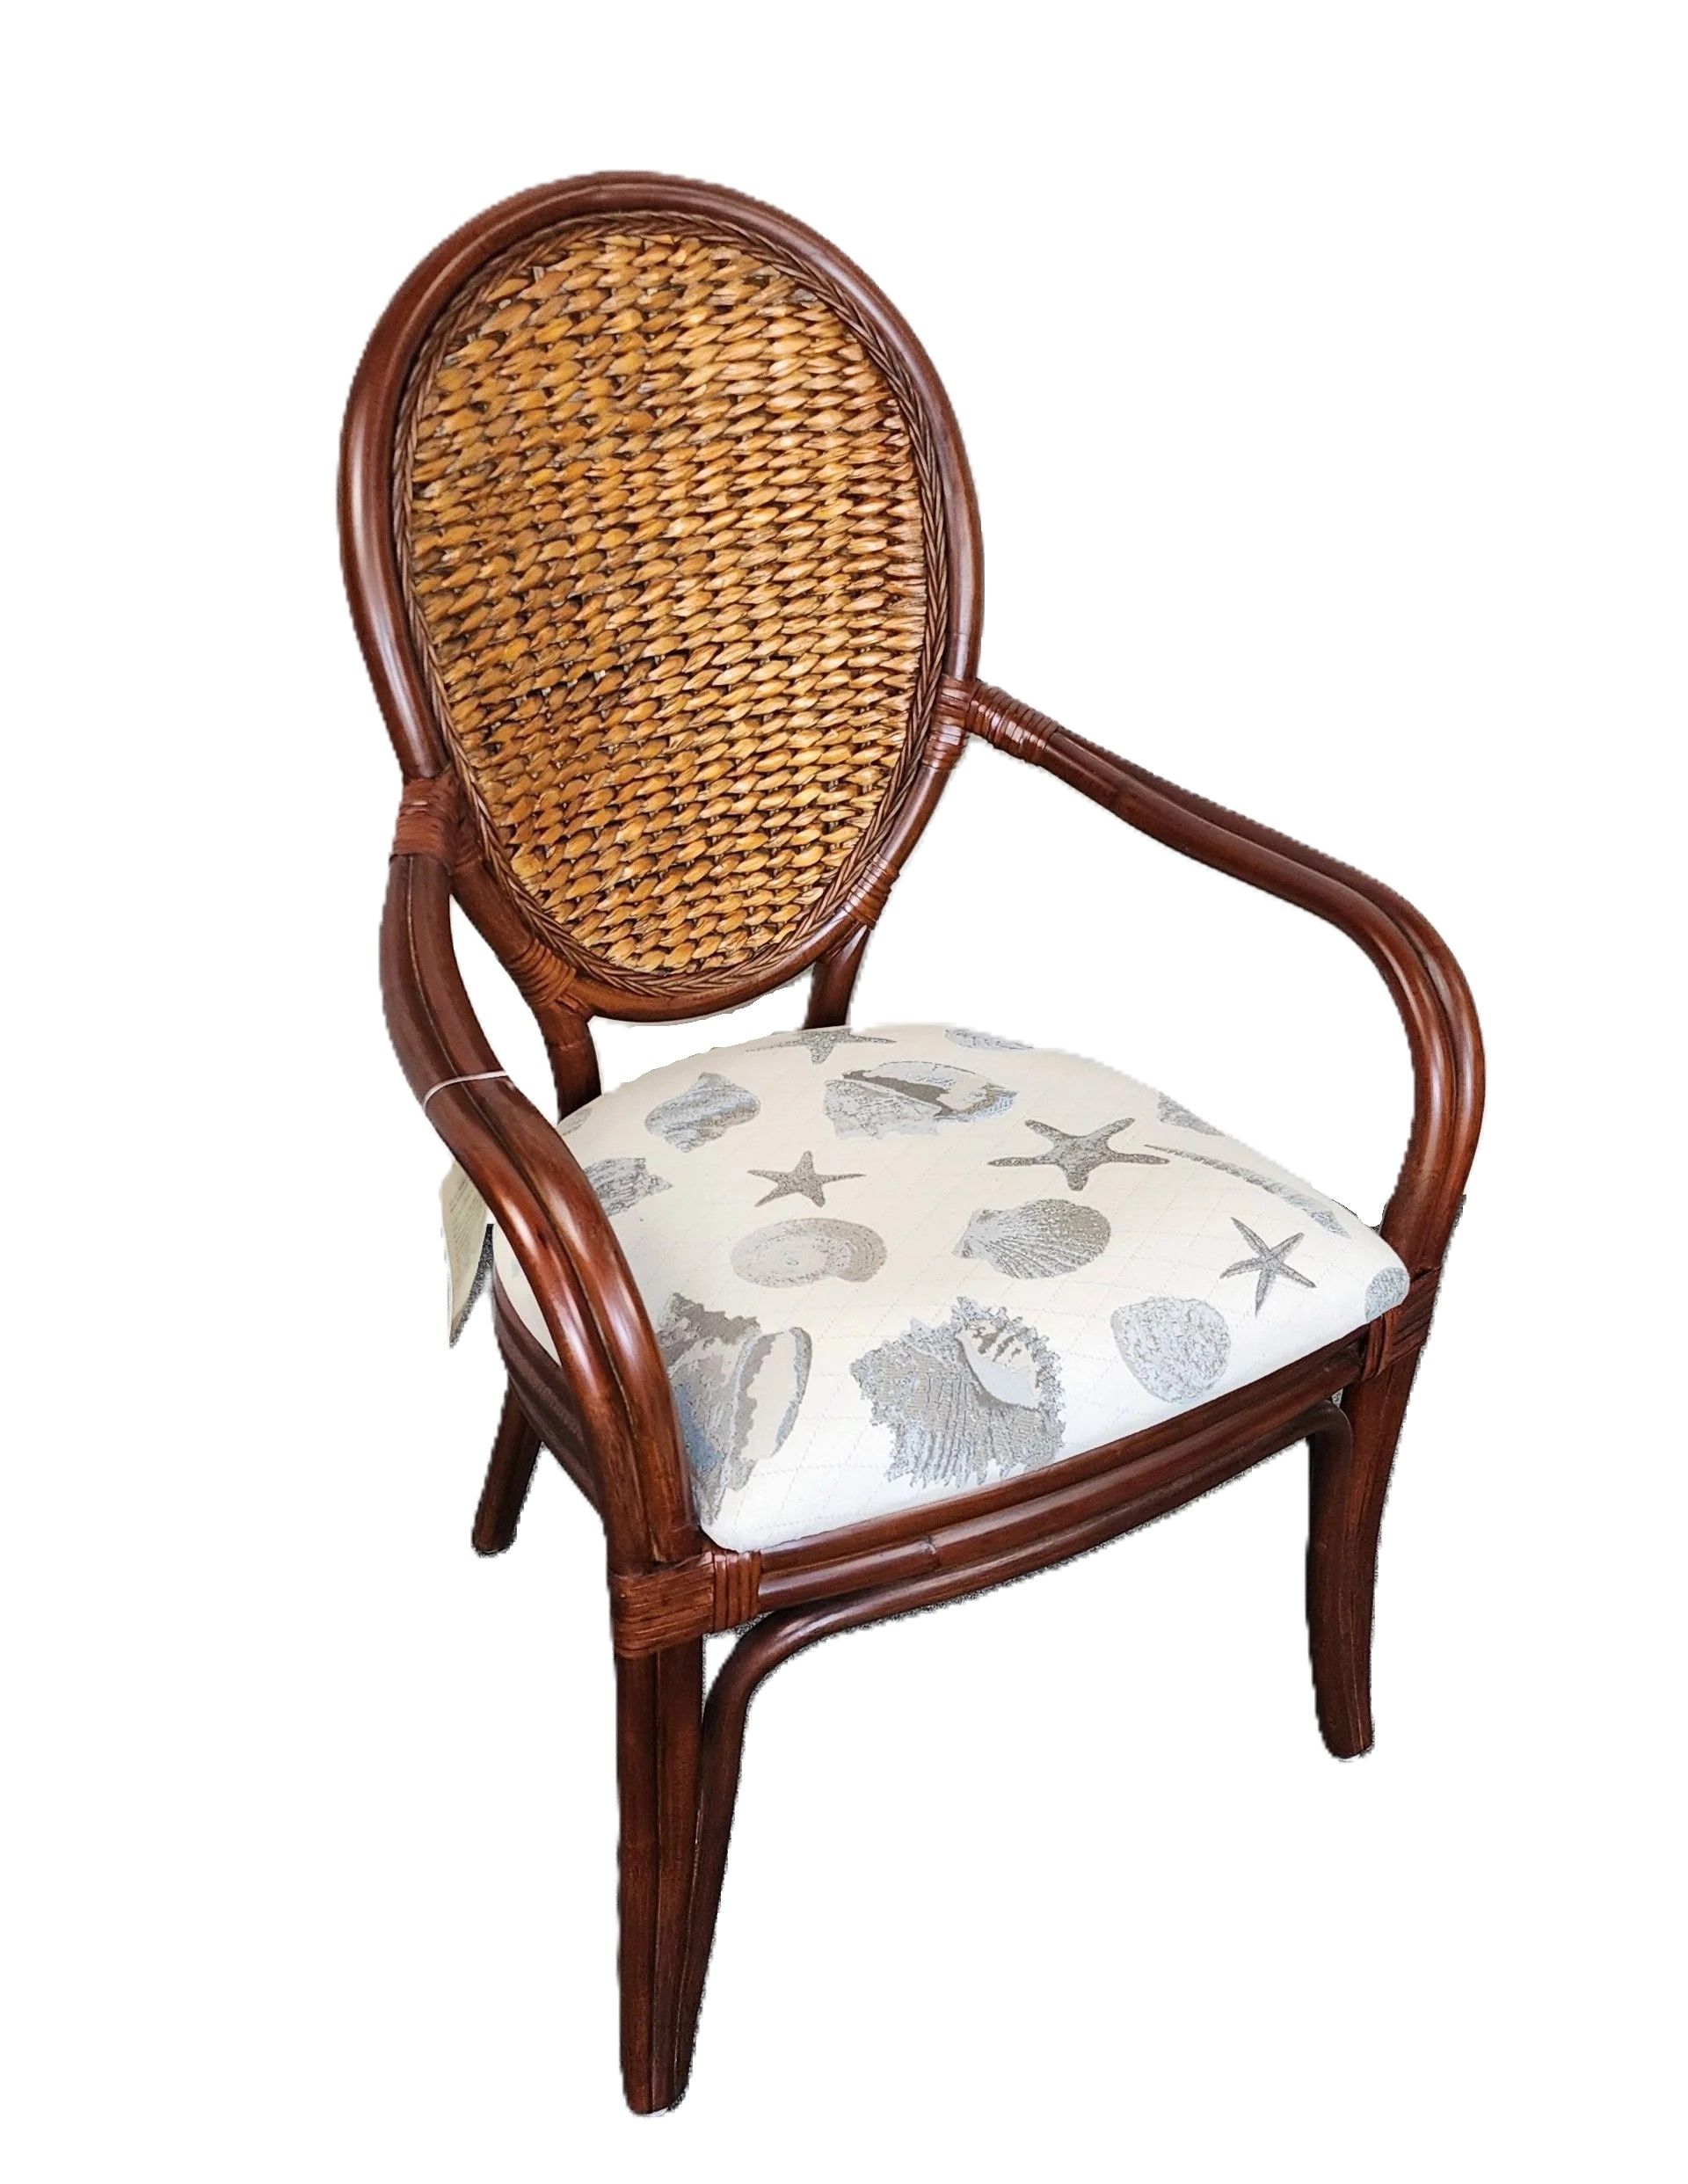 Dark rattan armchair featuring a woven, rounded back and coastal-themed cushions.